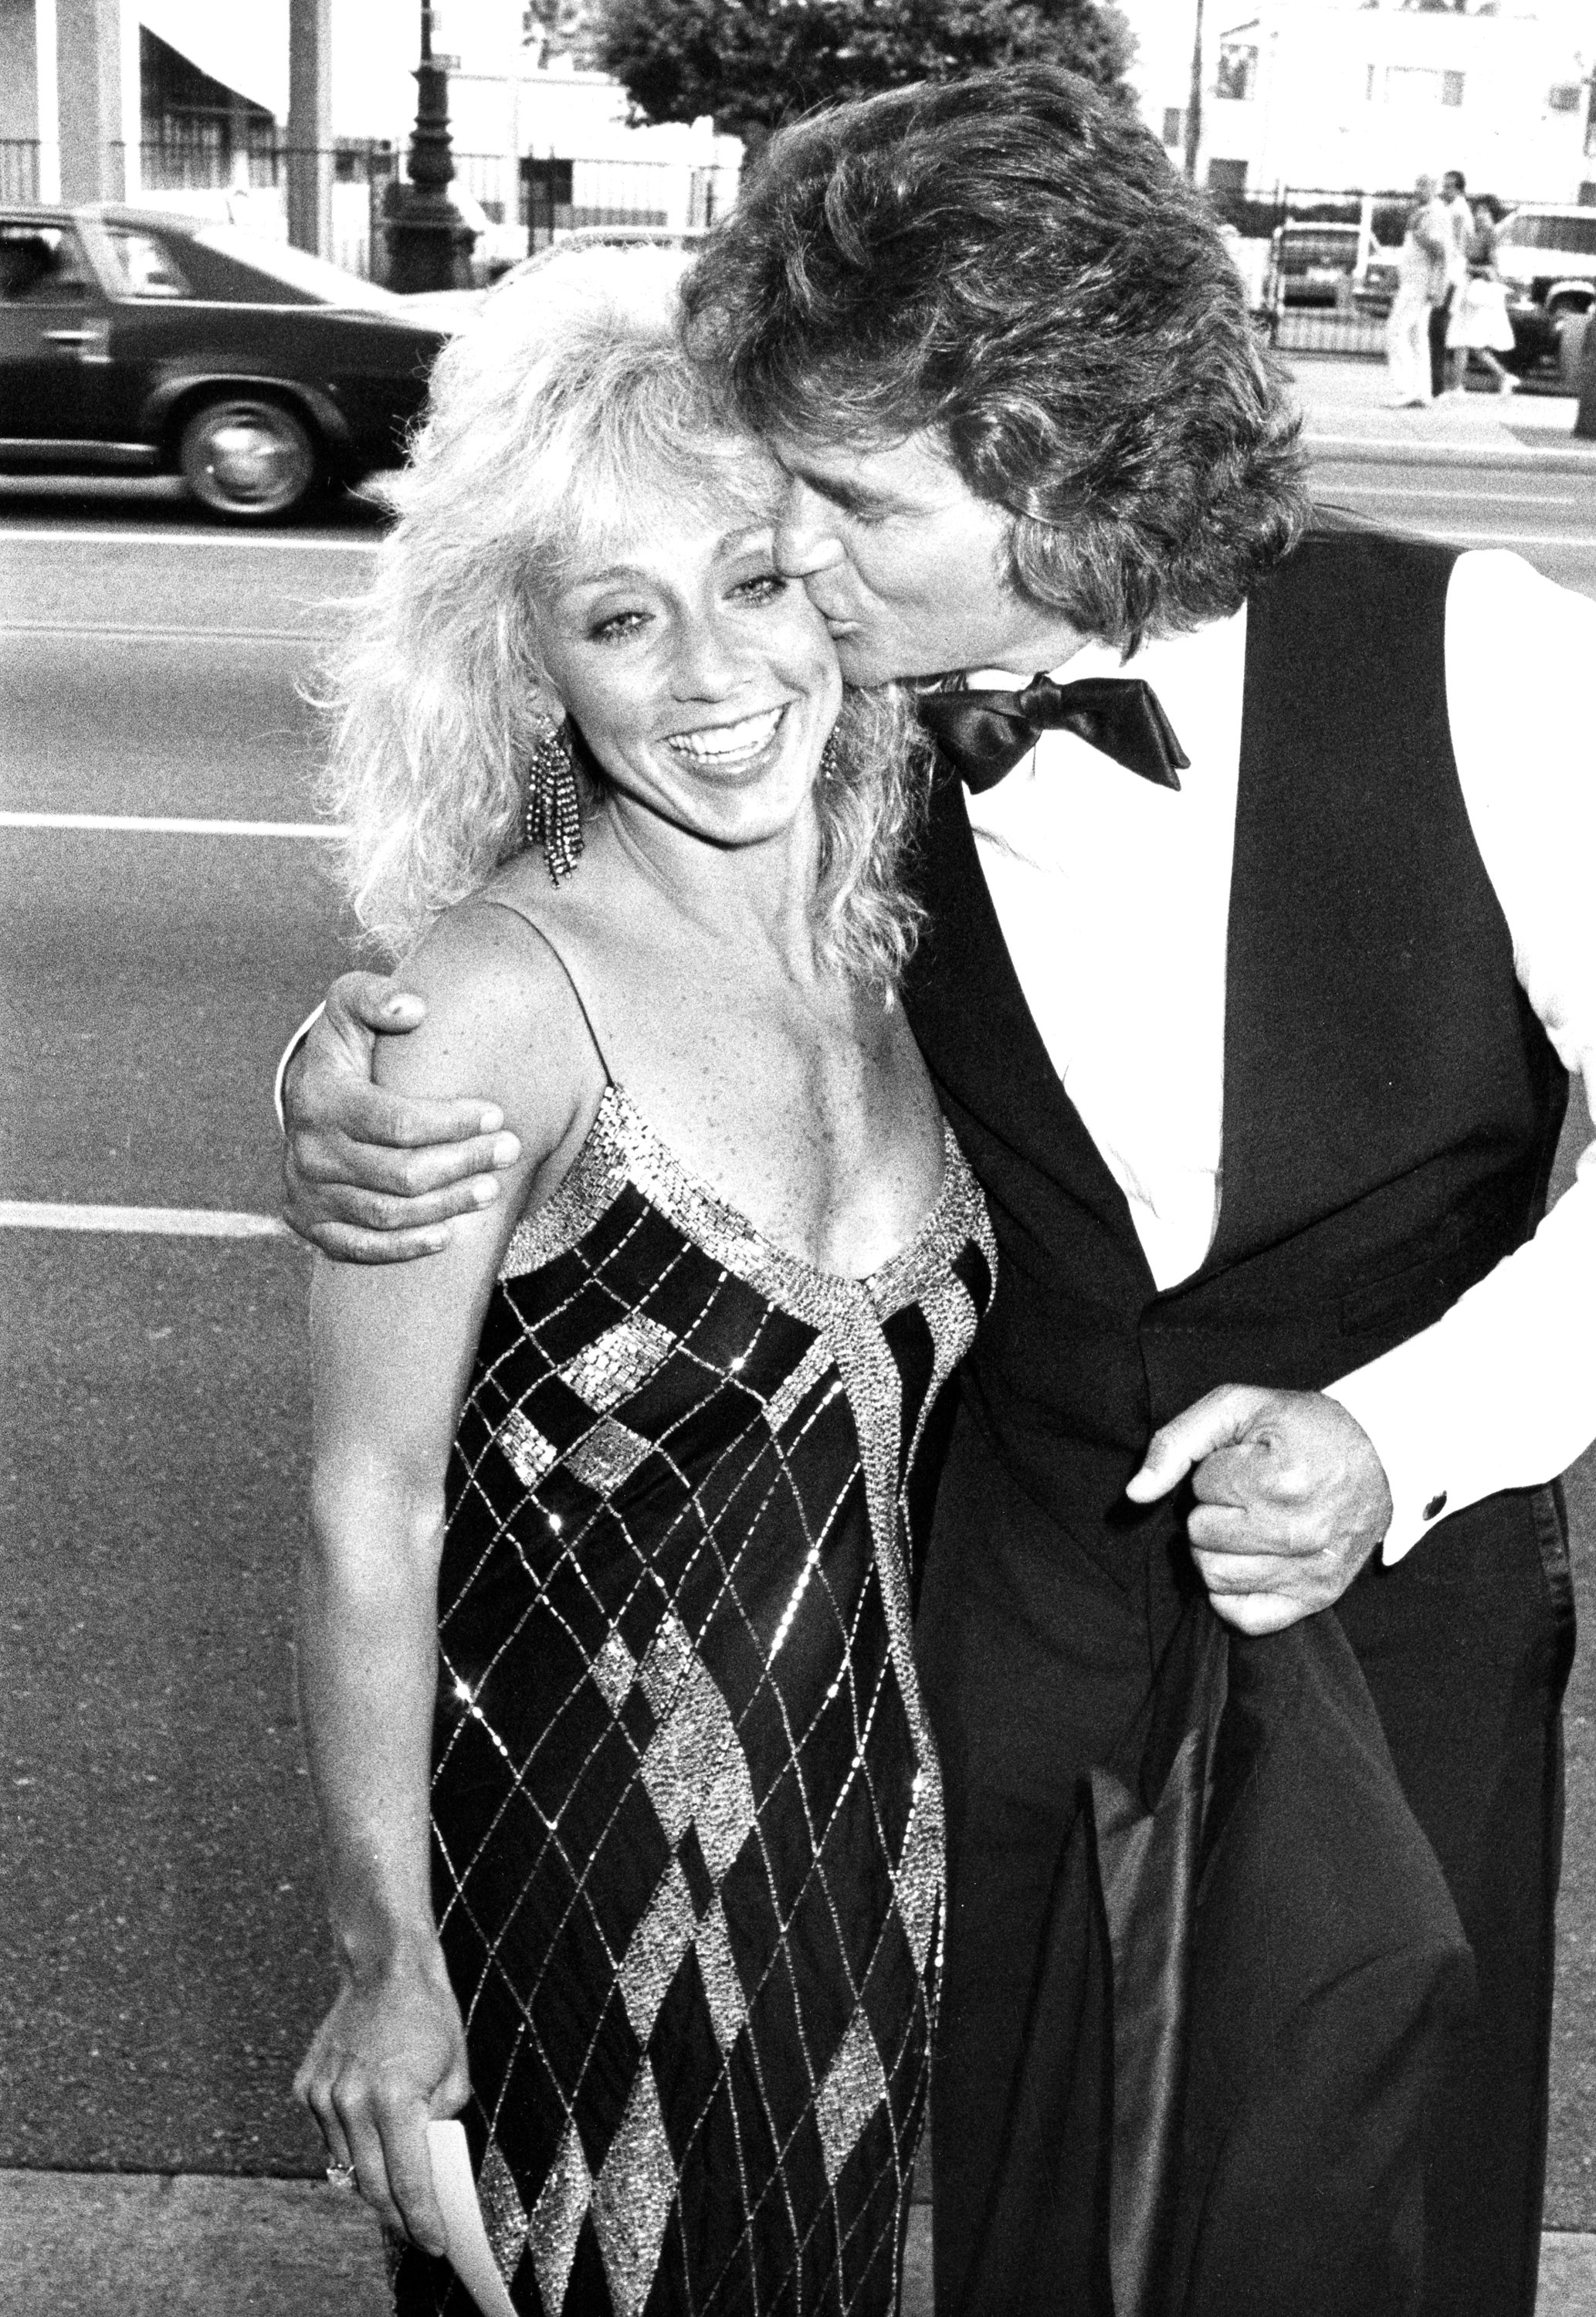 Michael Landon and wife Cindy Clerico attend the premiere of "Sam's Son" at the Academy Theater on August 15, 1984 in Beverly Hills, California. / Source: Getty Images